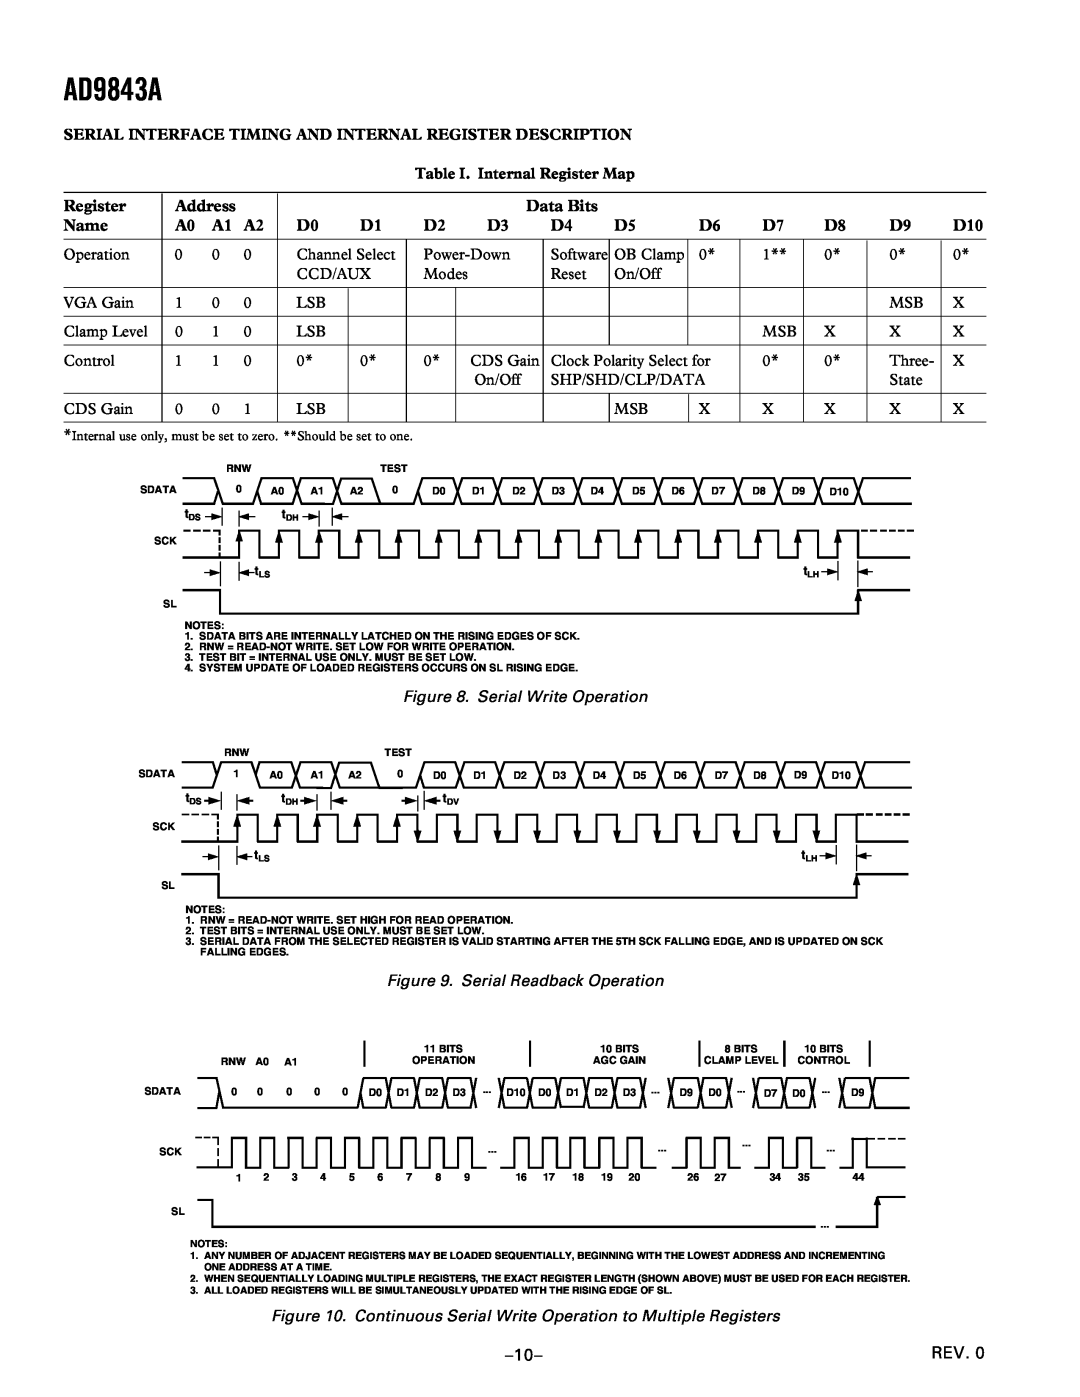 Analog Devices AD9843A manual Serial Interface Timing And Internal Register Description, Table I. Internal Register Map 